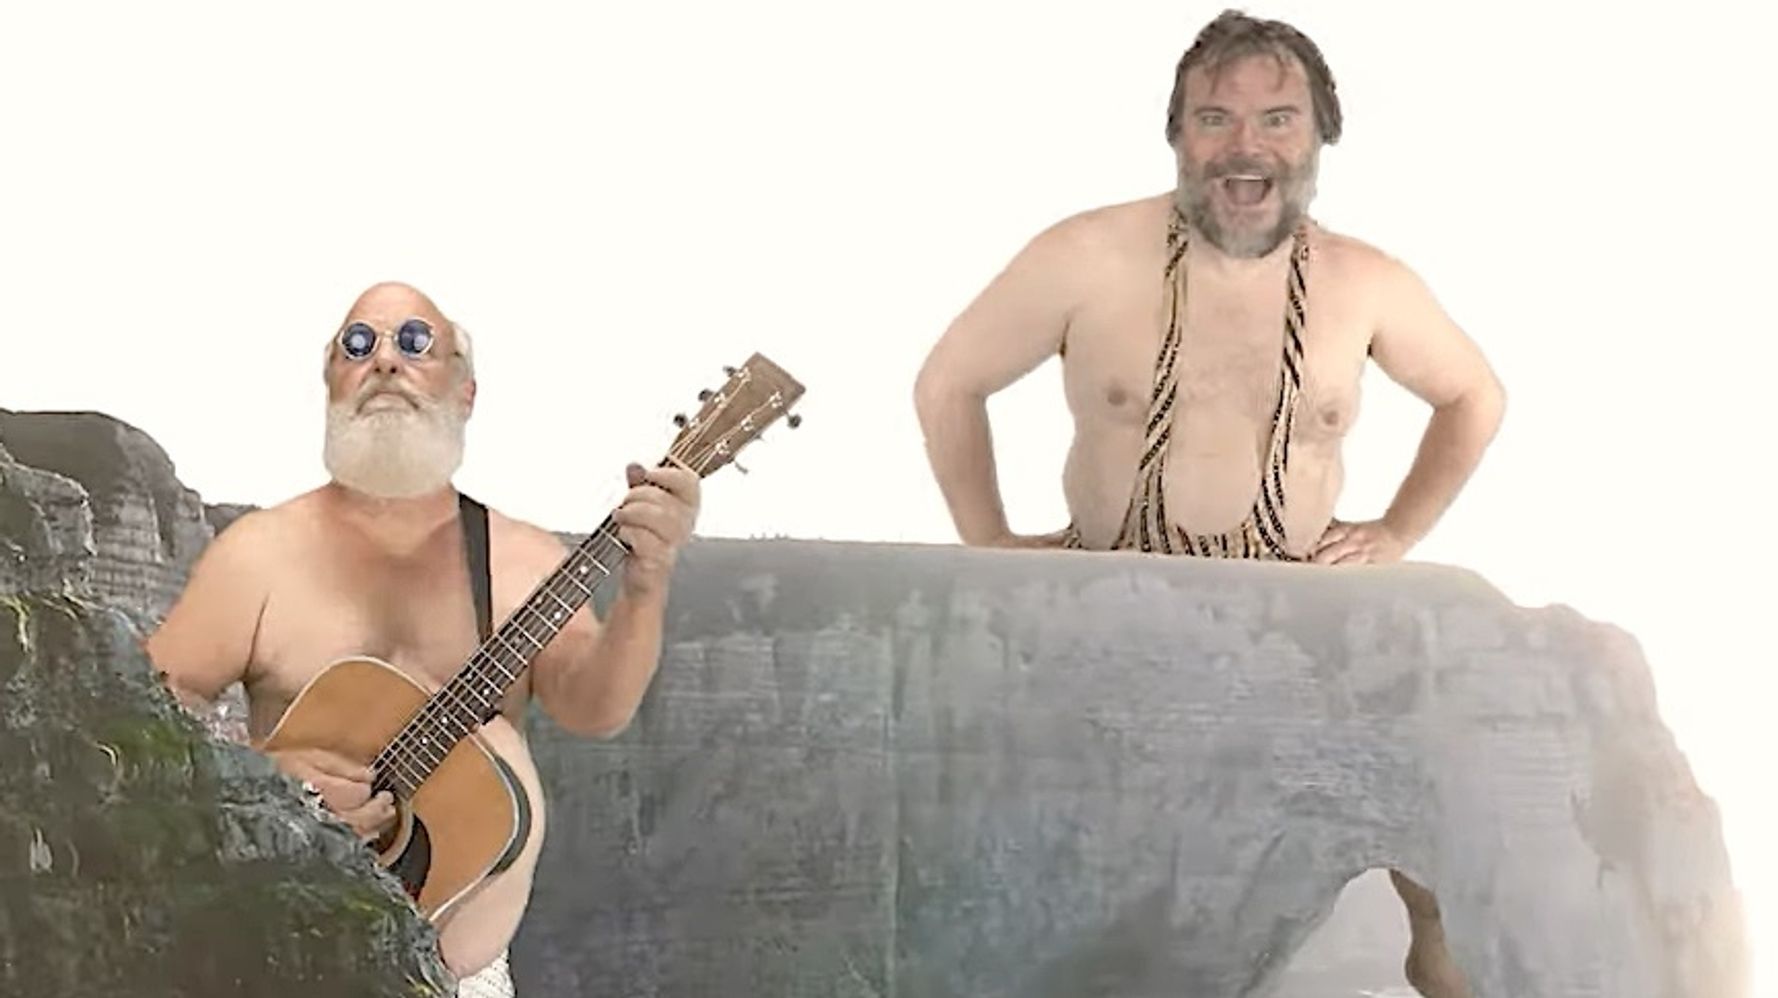 Jack Black, Kyle Gass Give Beatles Classic A Bonkers Tenacious D Makeover